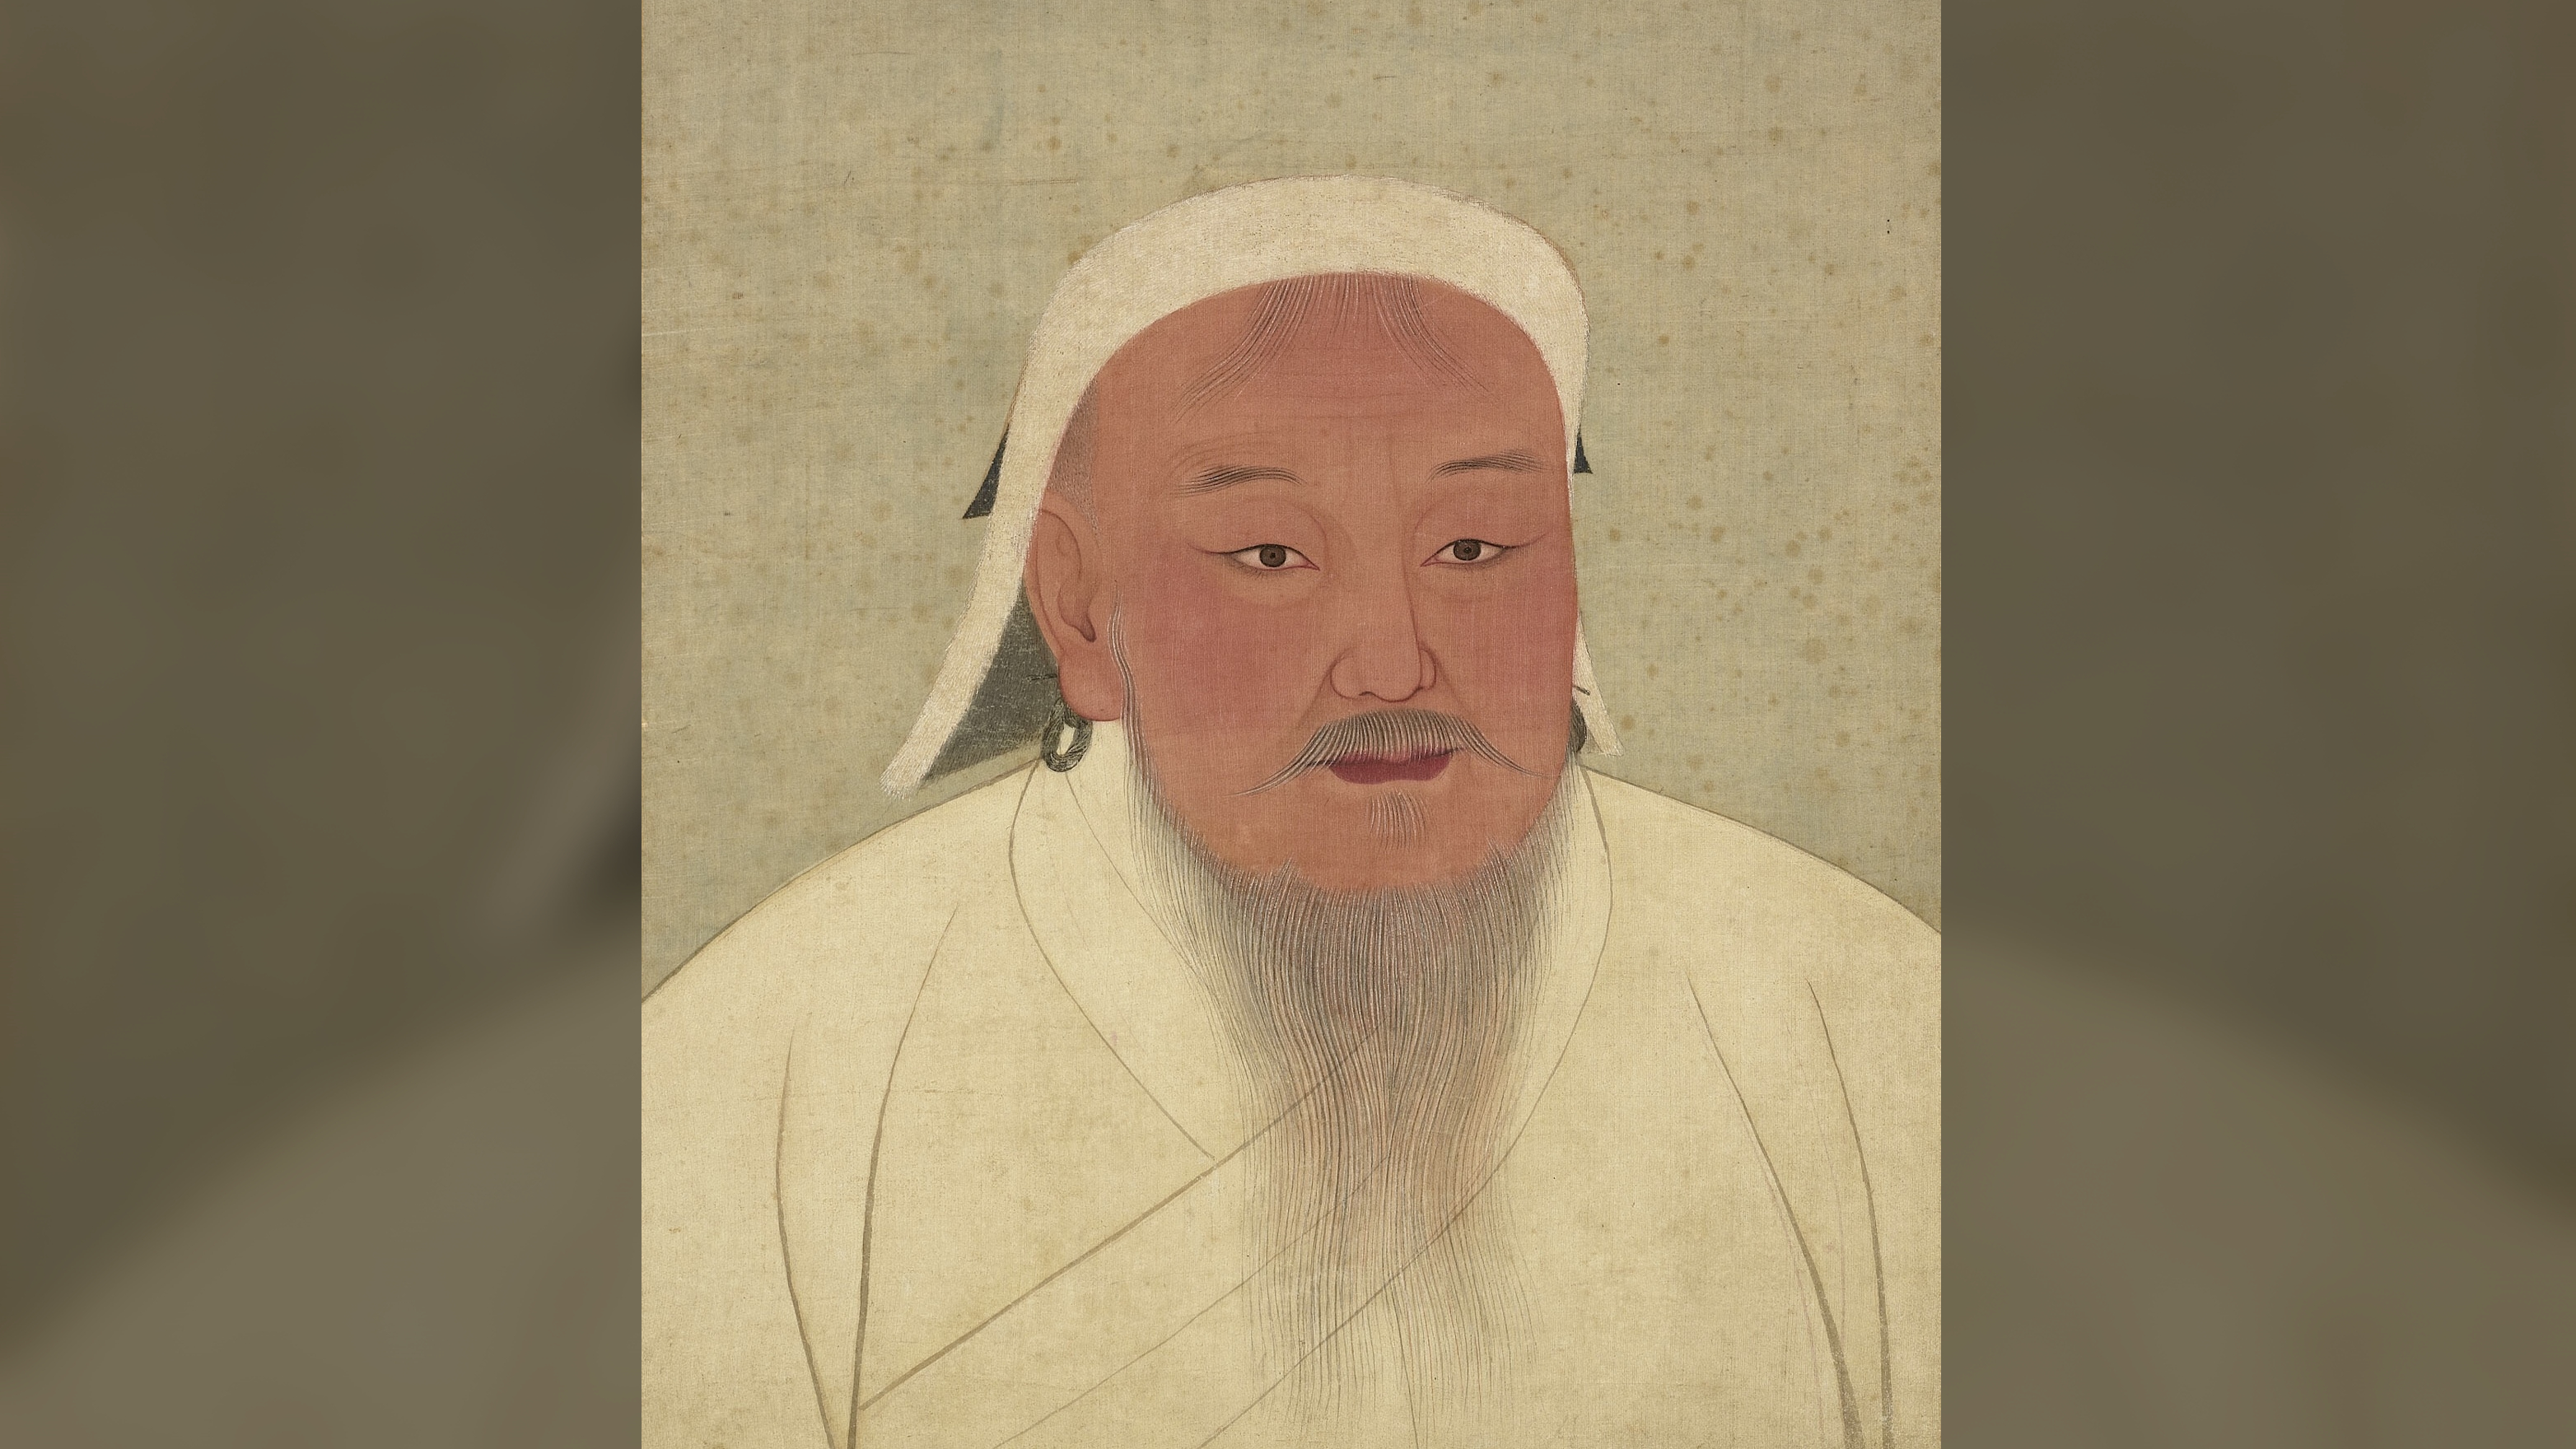 Portrait of Genghis Khan, from an album depicting Mongol emperors, now in National Palace Museum in Taipei.